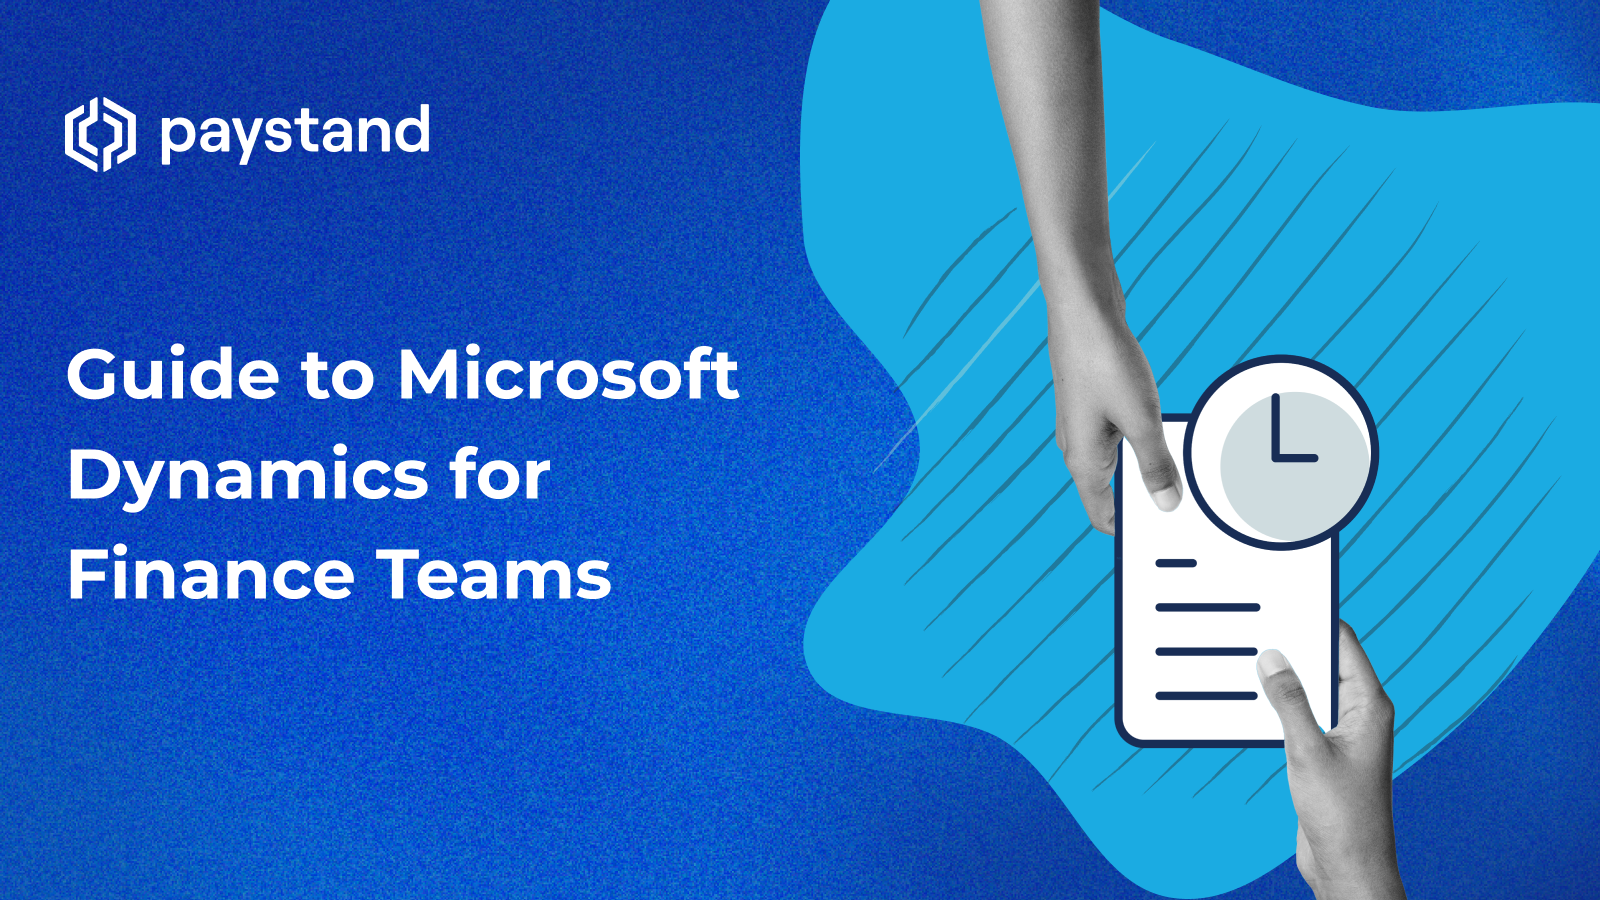 Guide to Microsoft Dynamics for Finance Teams